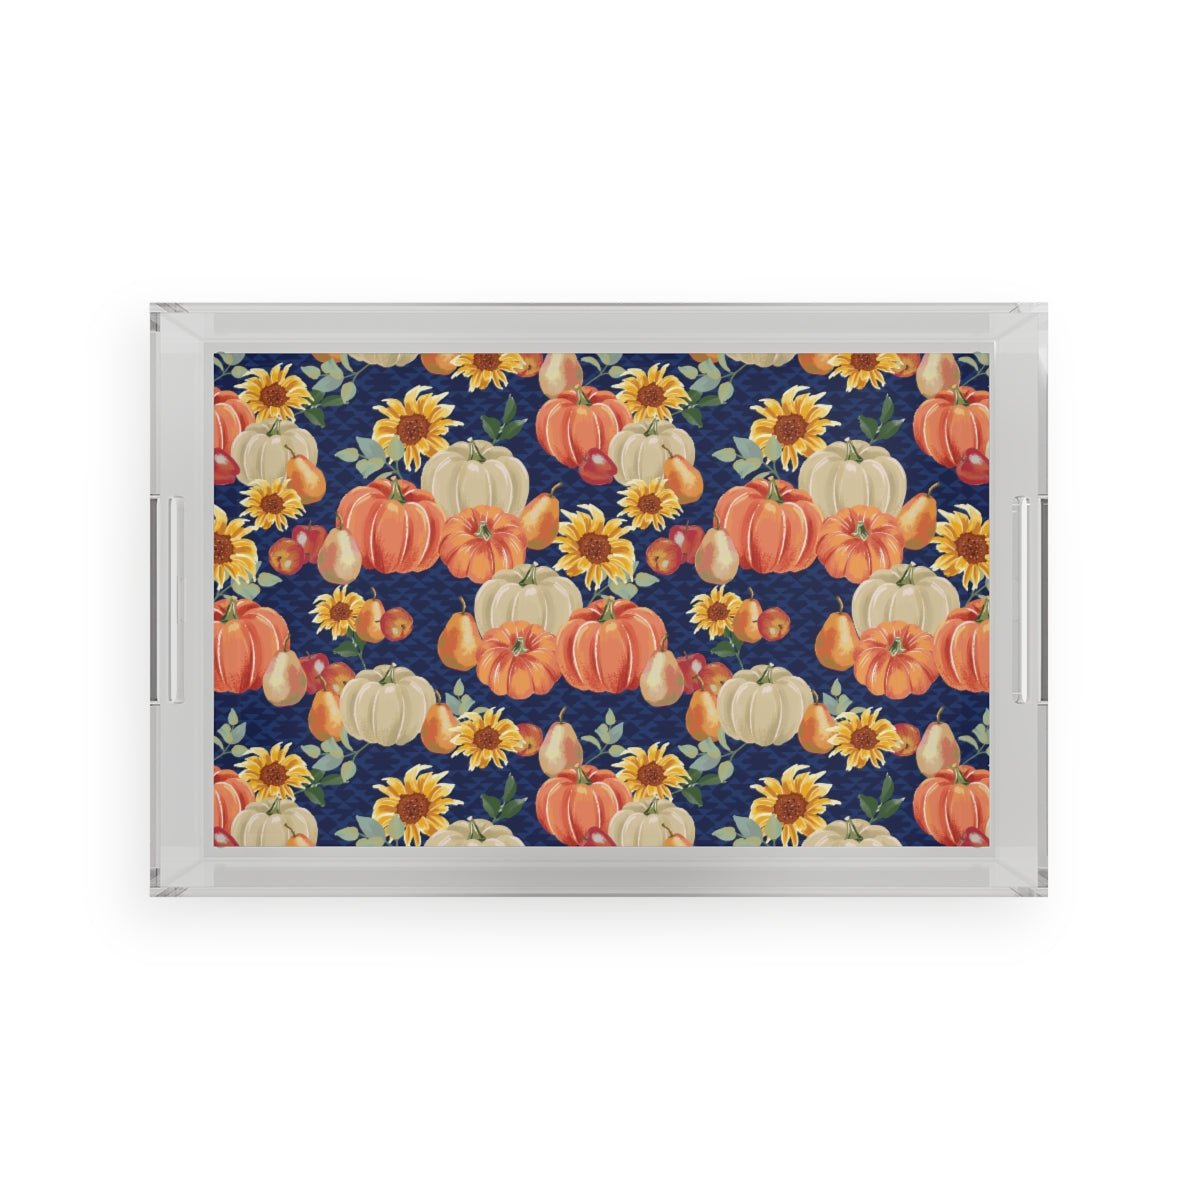 Fall Pumpkins and Sunflowers Acrylic Serving Tray - Puffin Lime